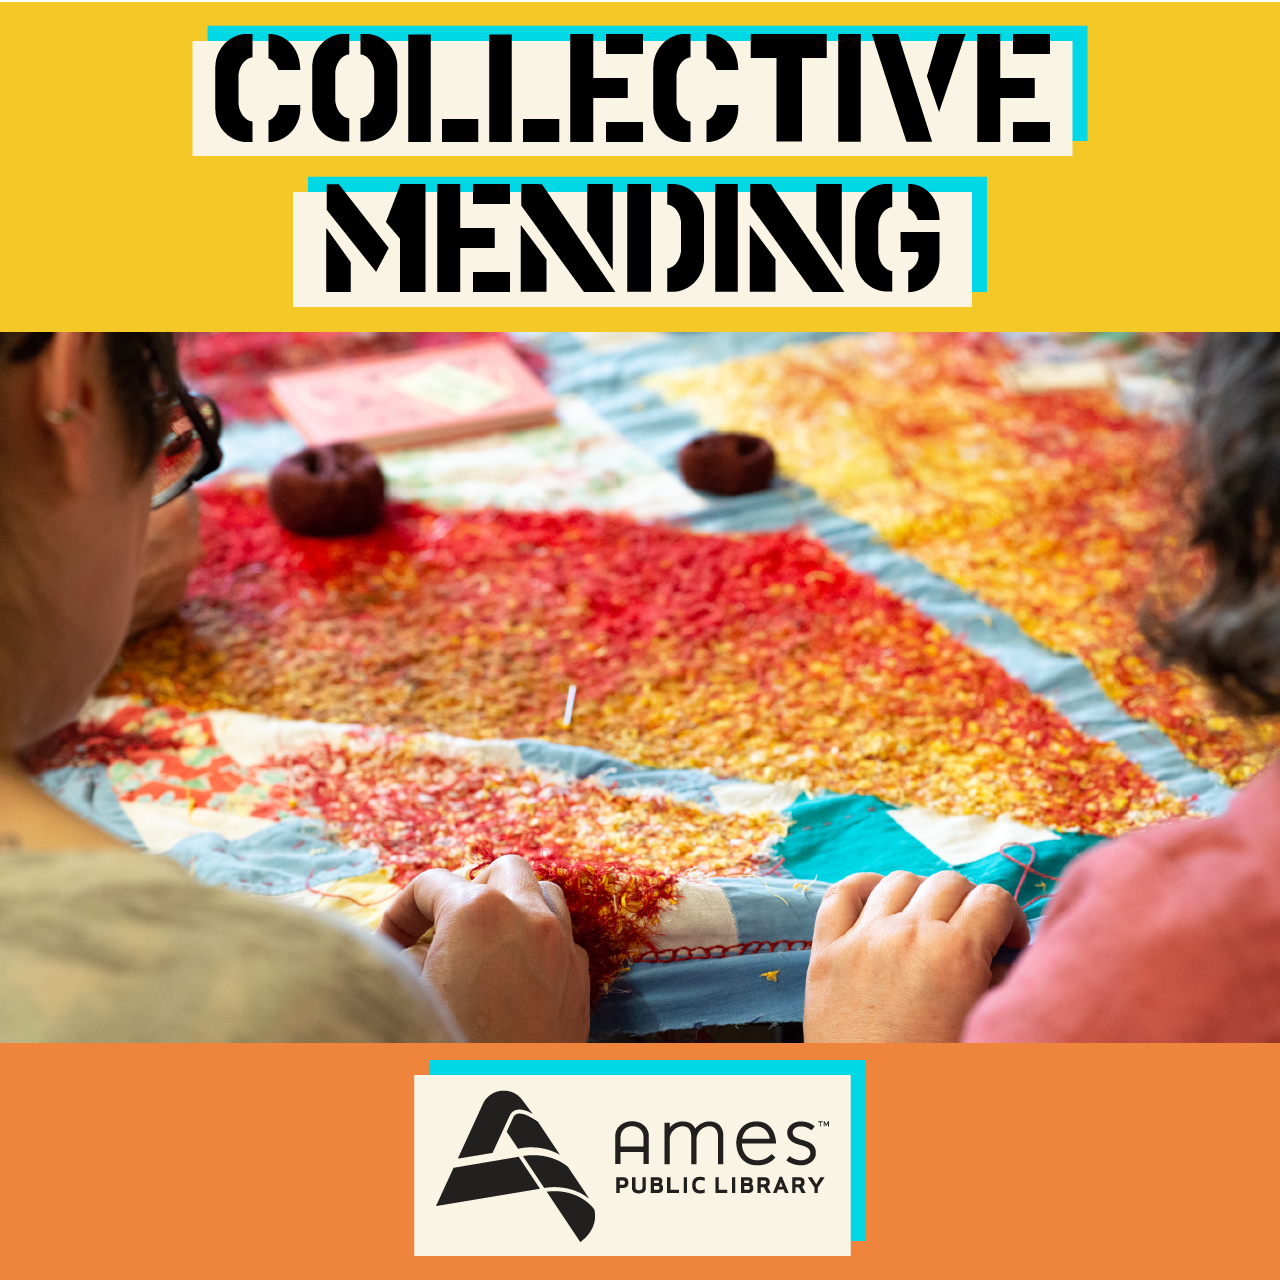 Image features the words "Collective Mending" and a photo of two people working on a colorful quilt together.